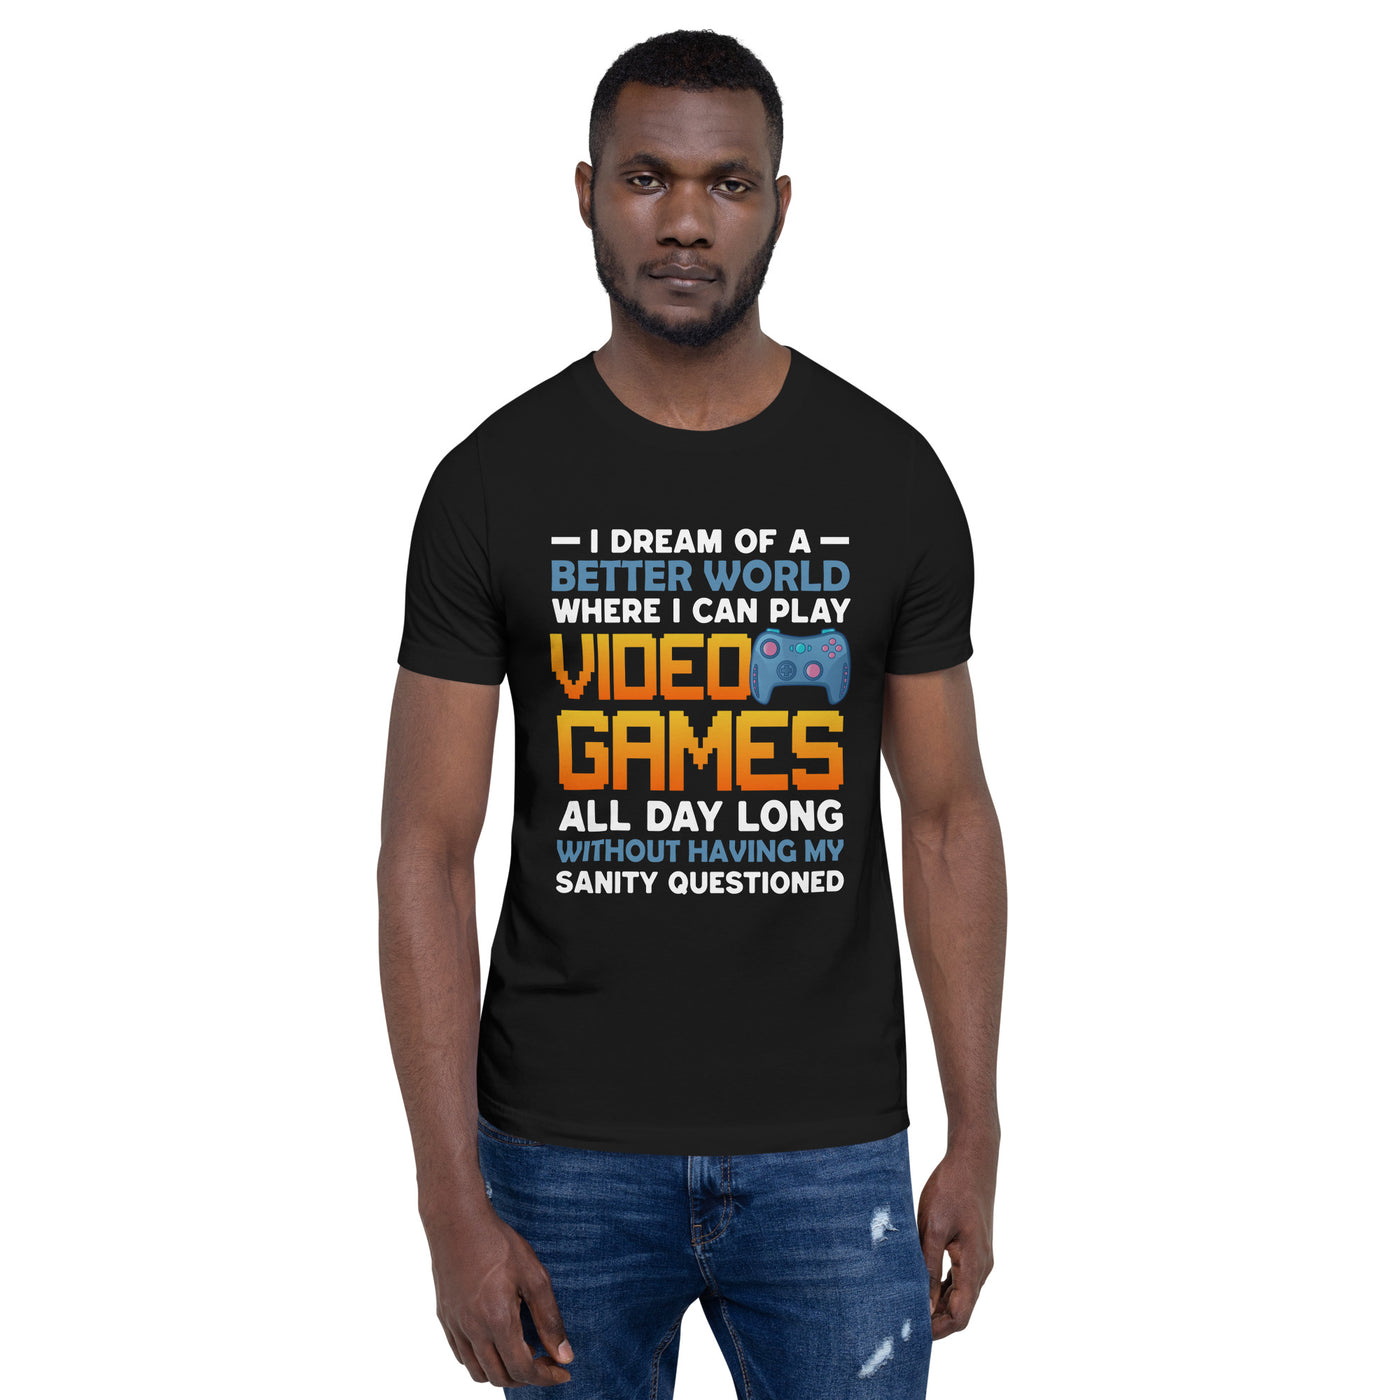 I Dream of a Better World where I can Play Video Games - Unisex t-shirt